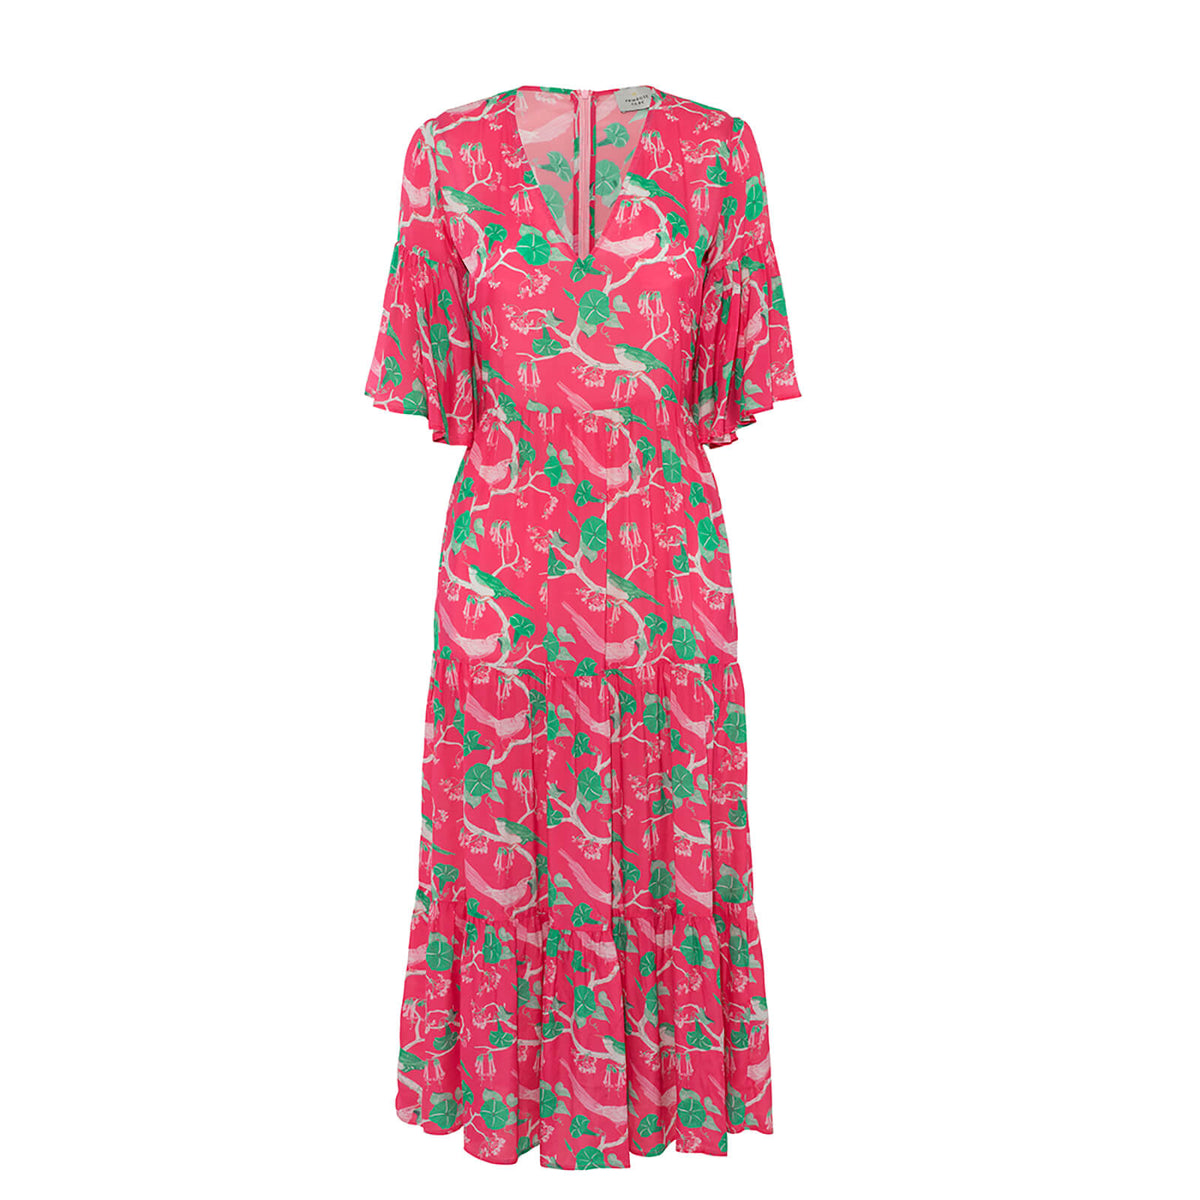 PP Alice dress in pink glorious